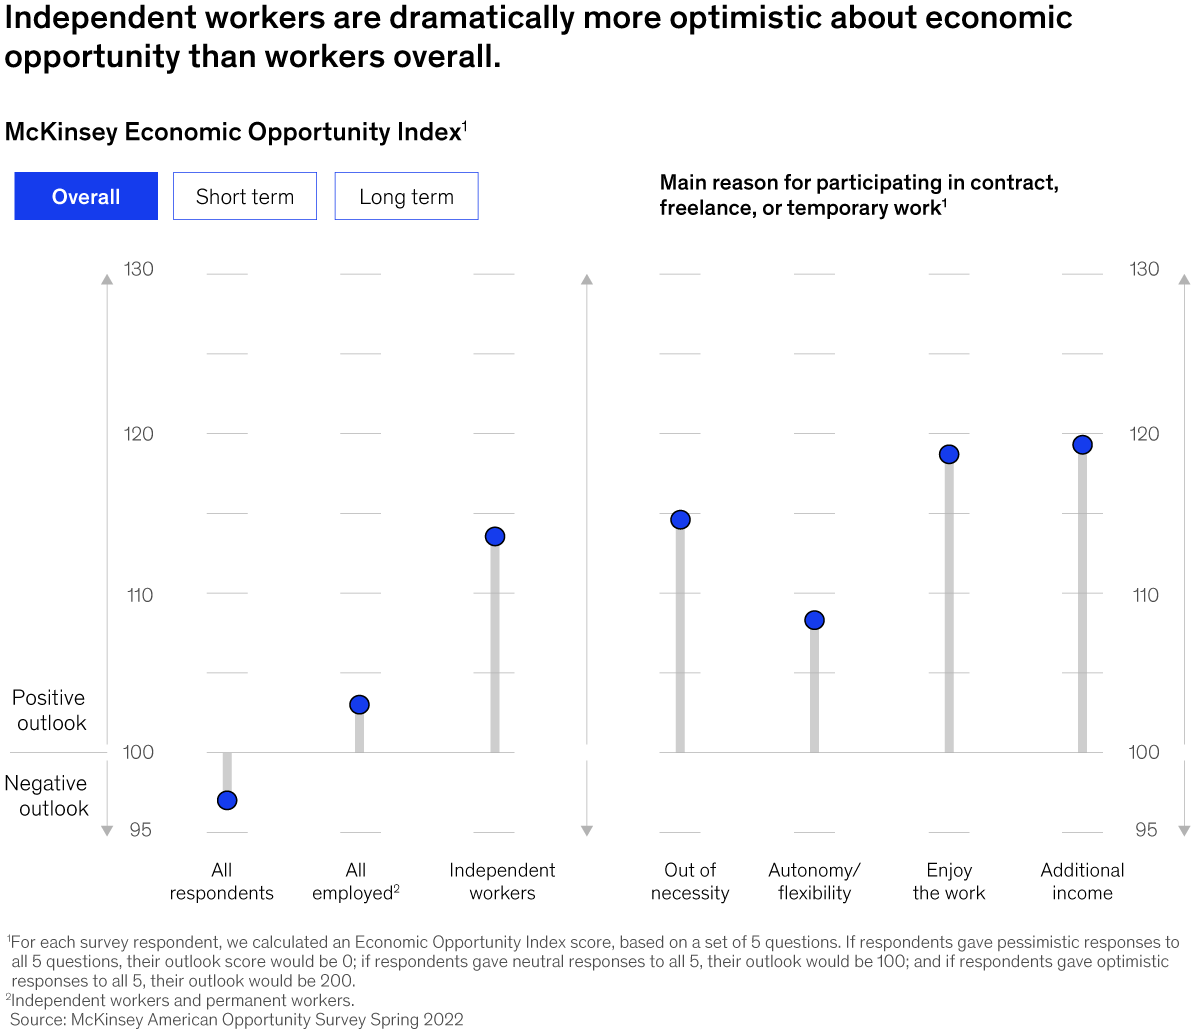 Chart detailing that independent worChart detailing that independent workers are dramatically more optimistic about economic opportunity than workers overall